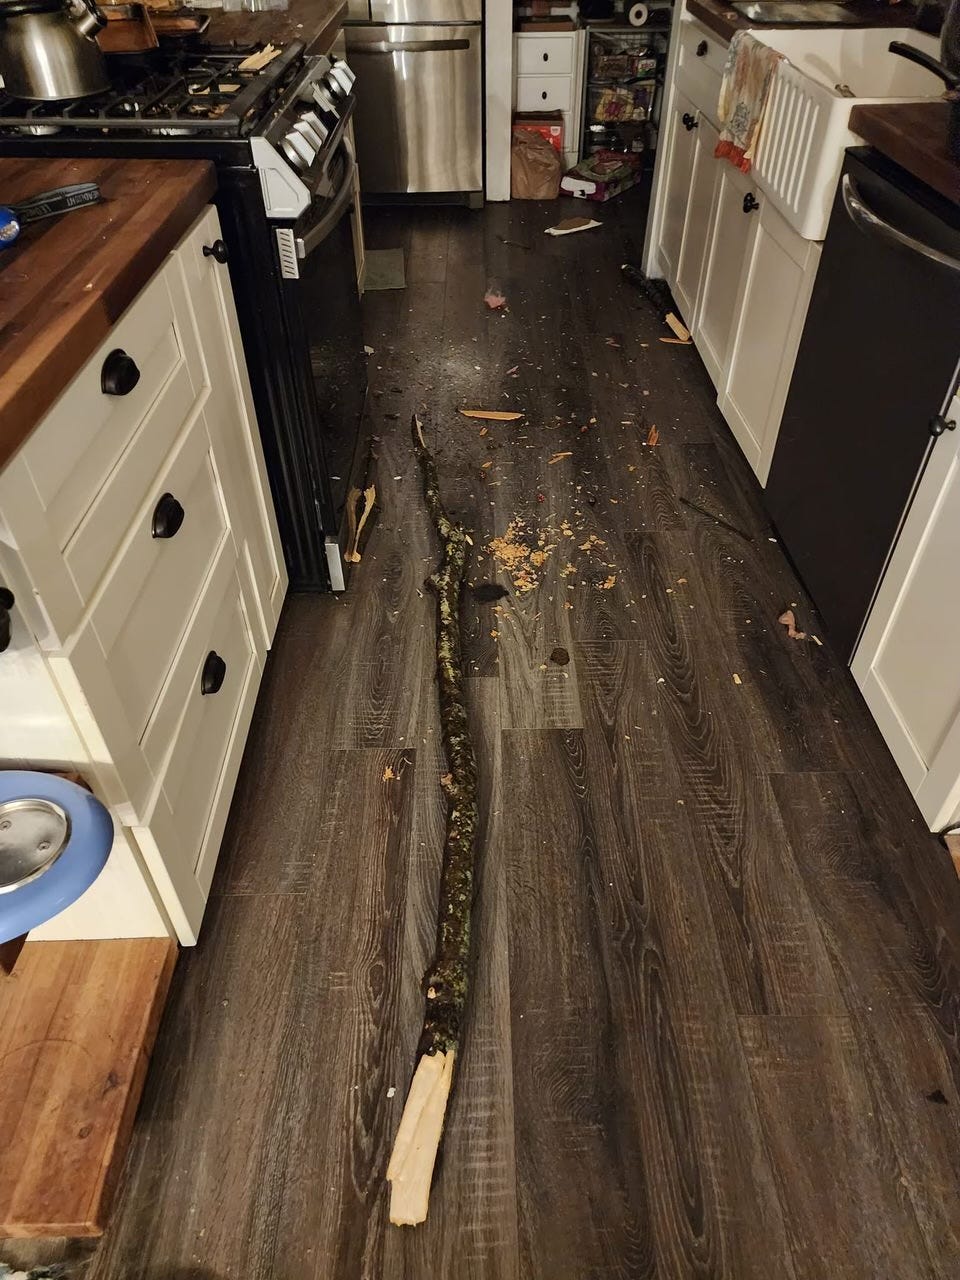 A tree limb downed by ice from Wednesday's storm landed on Nicole Streeter's kitchen floor after ripping through the roof of her home on Wells Road in Dundee, Michigan.